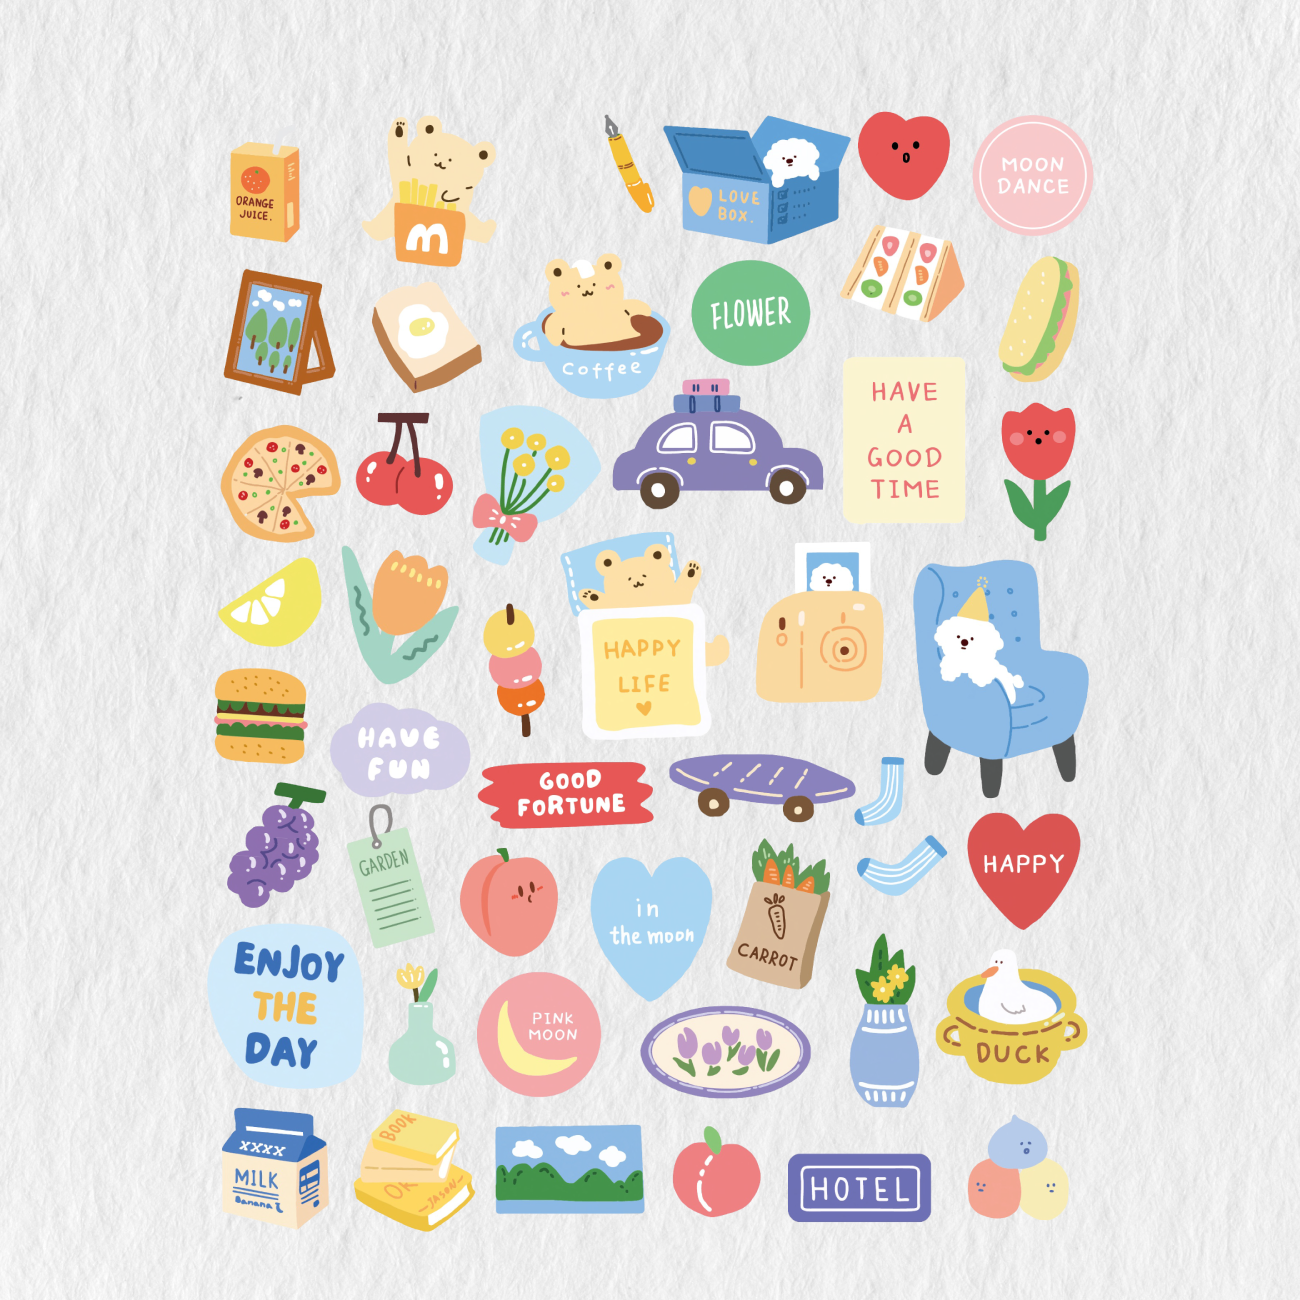 166 Cute Doodle Digital Stickers Set — Stationery Pal